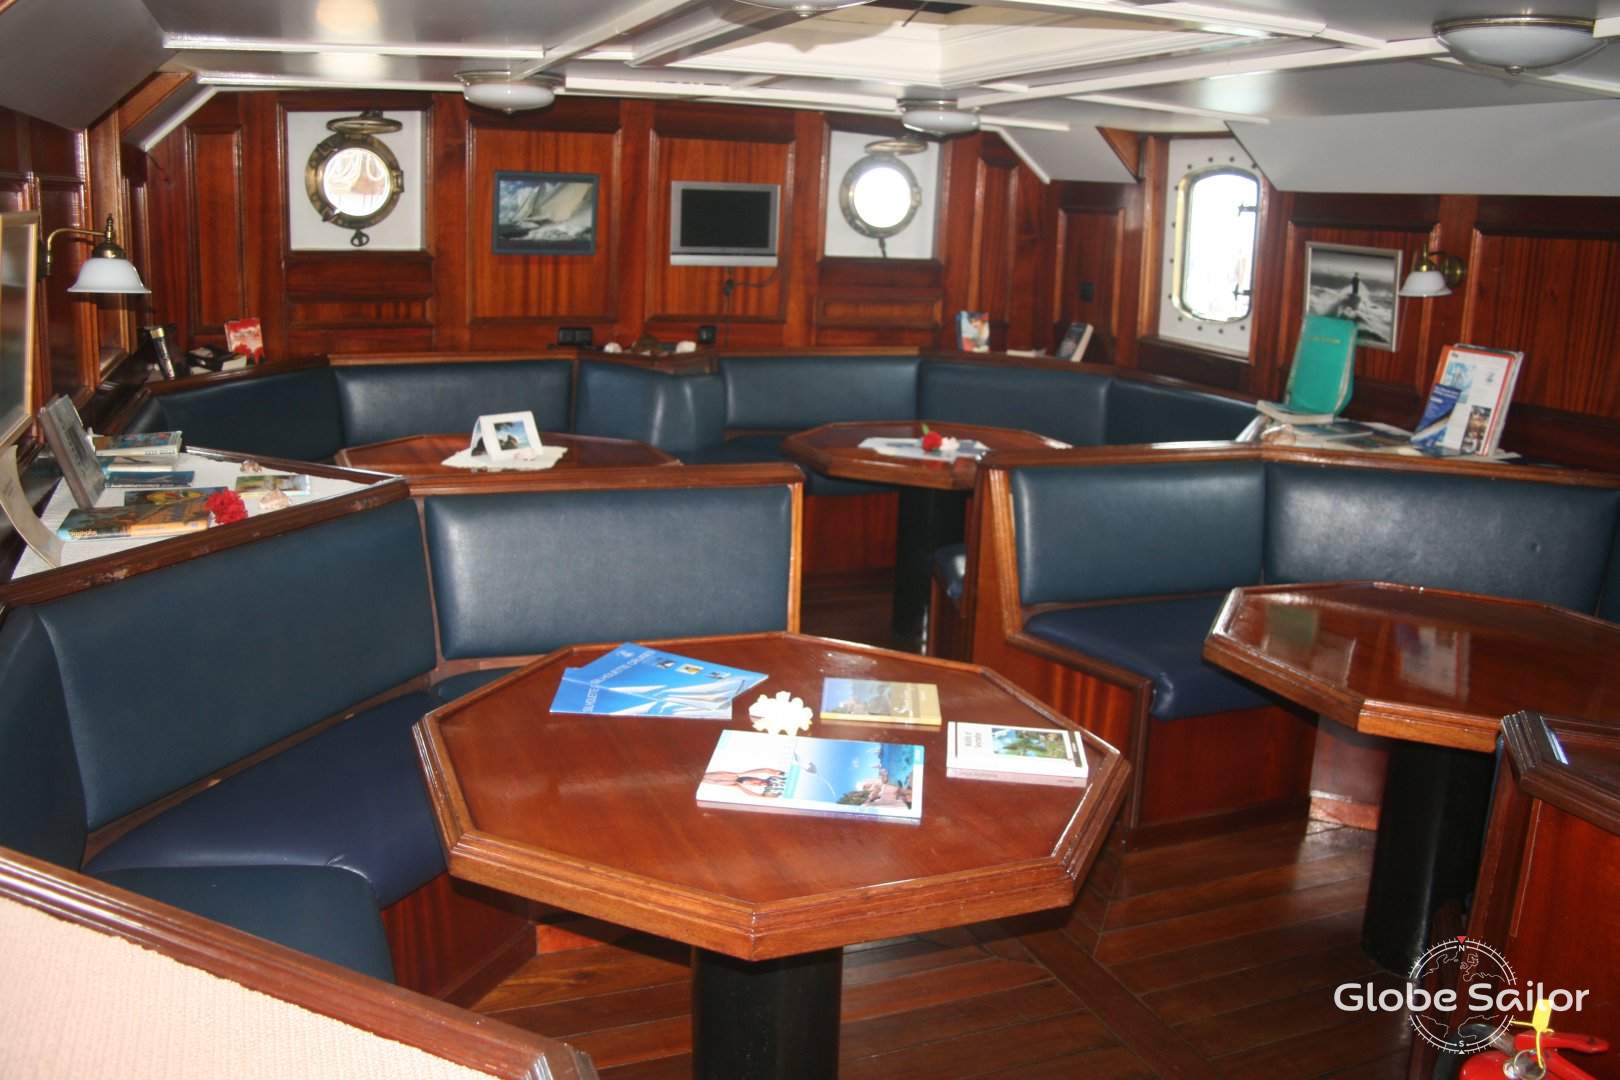 The spacious saloon can accommodate all guests